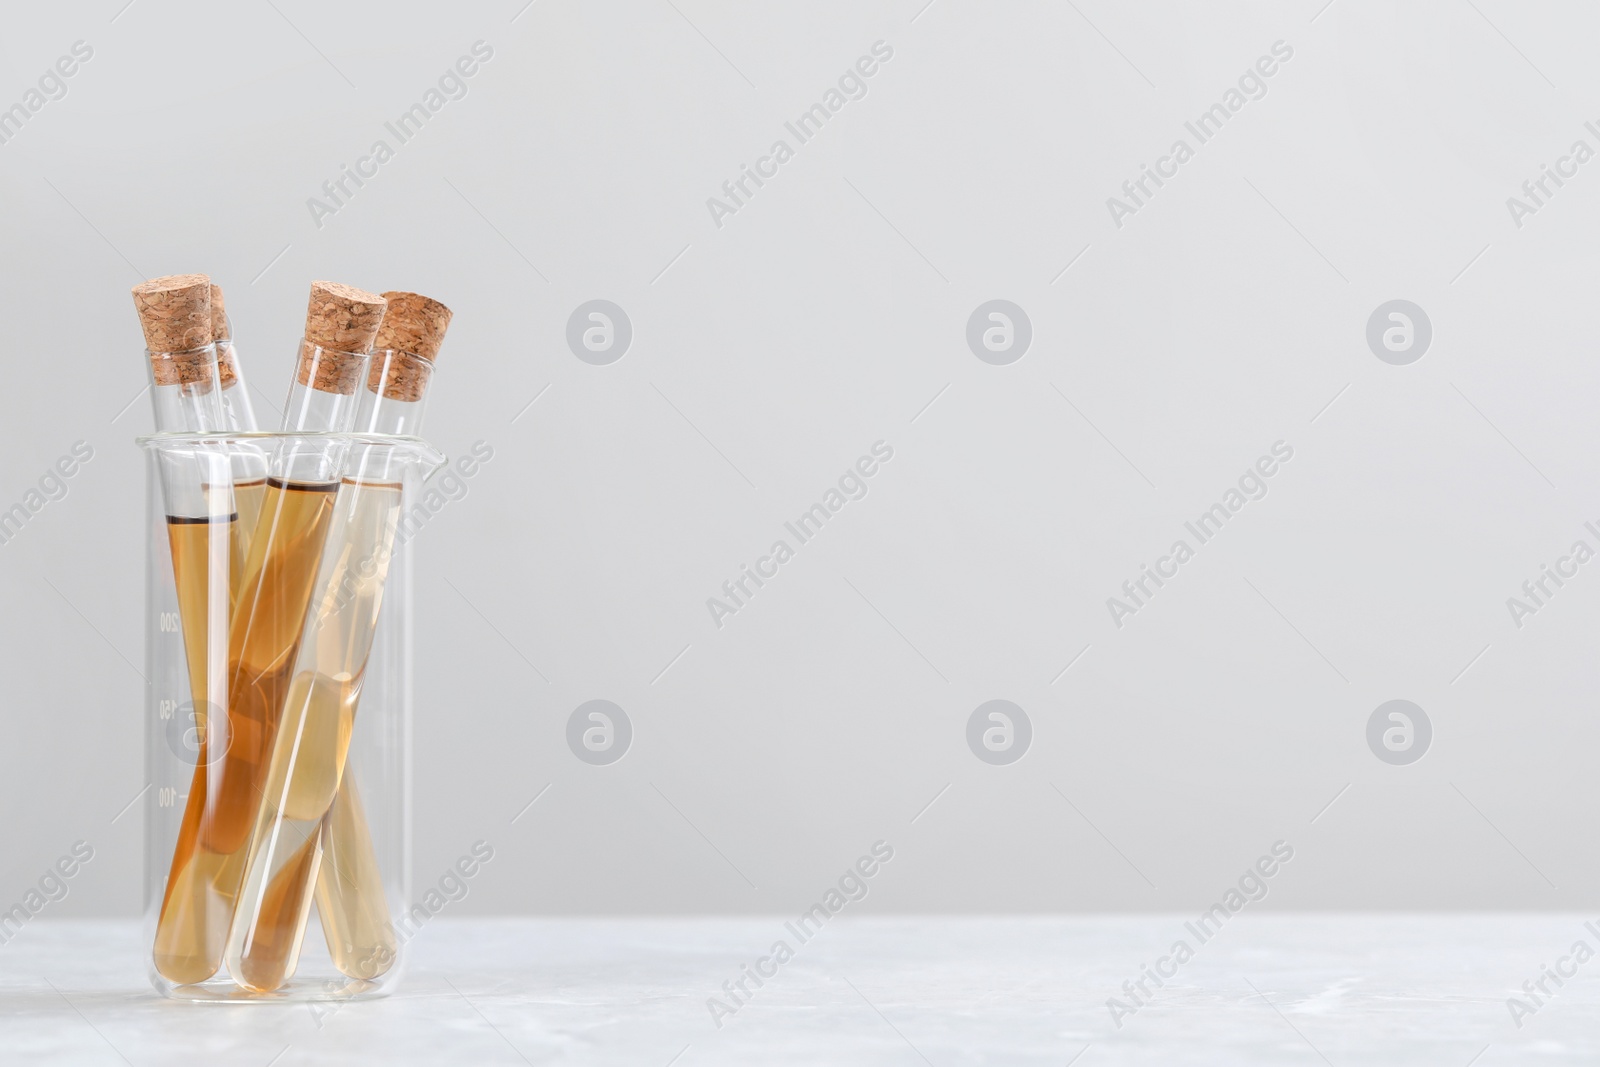 Photo of Test tubes with brown liquid on white table against light background. Space for text